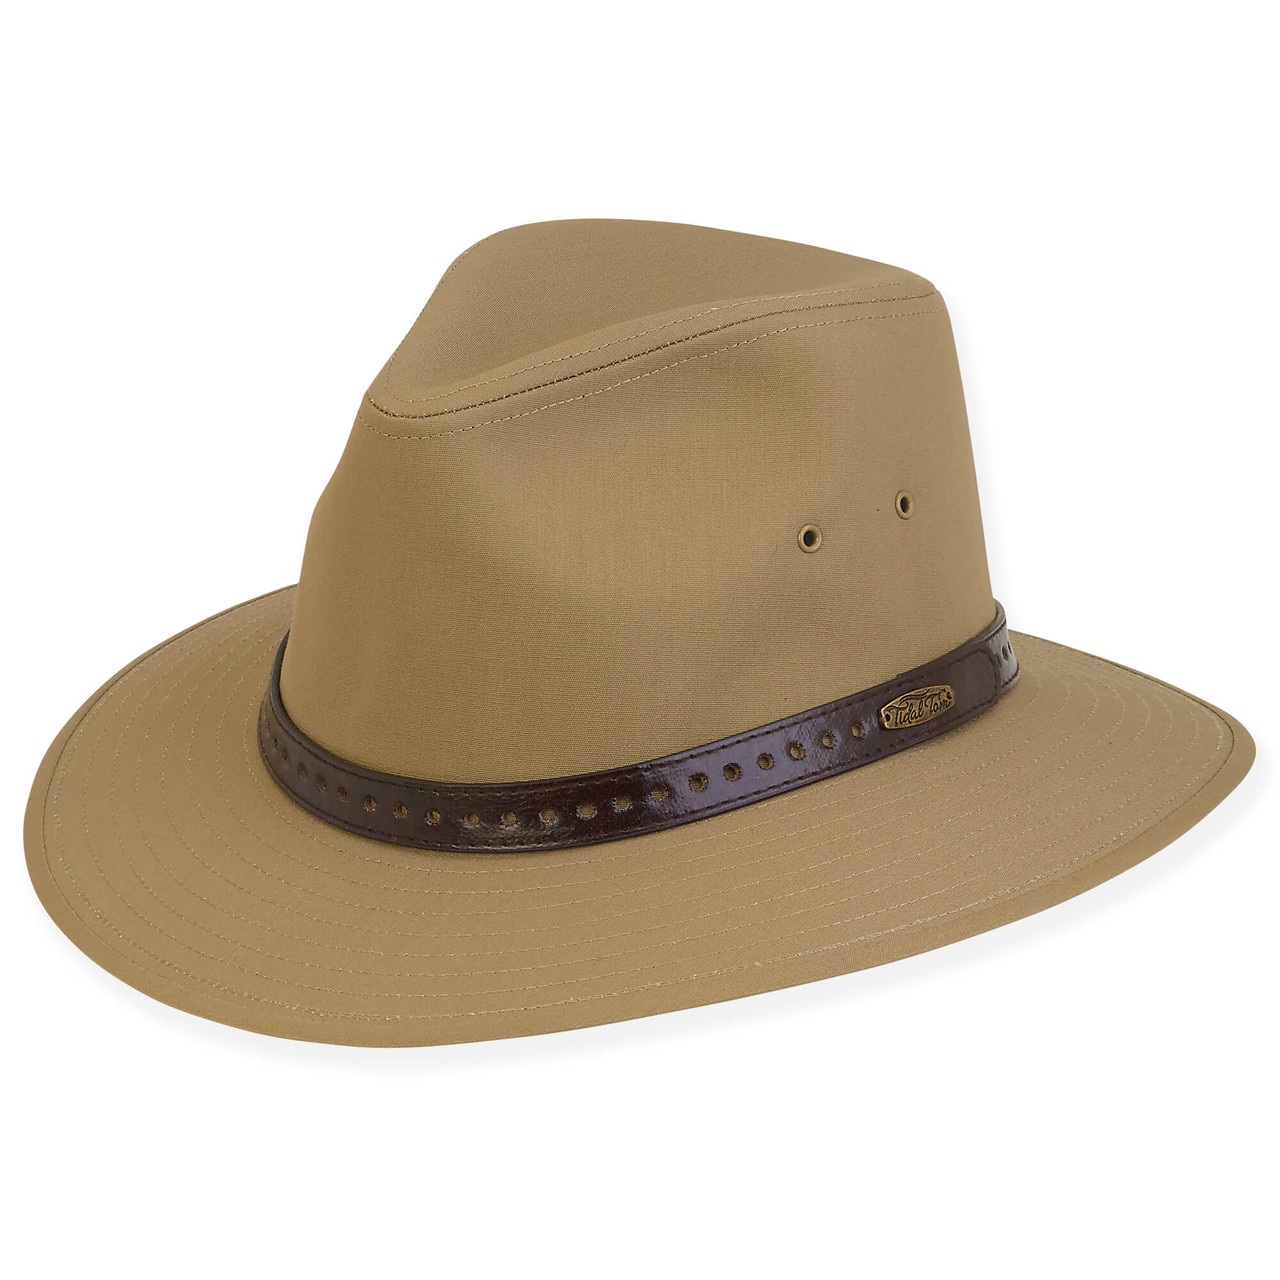 Up To 73% Off on Men Cotton Safari Hat Wide Br